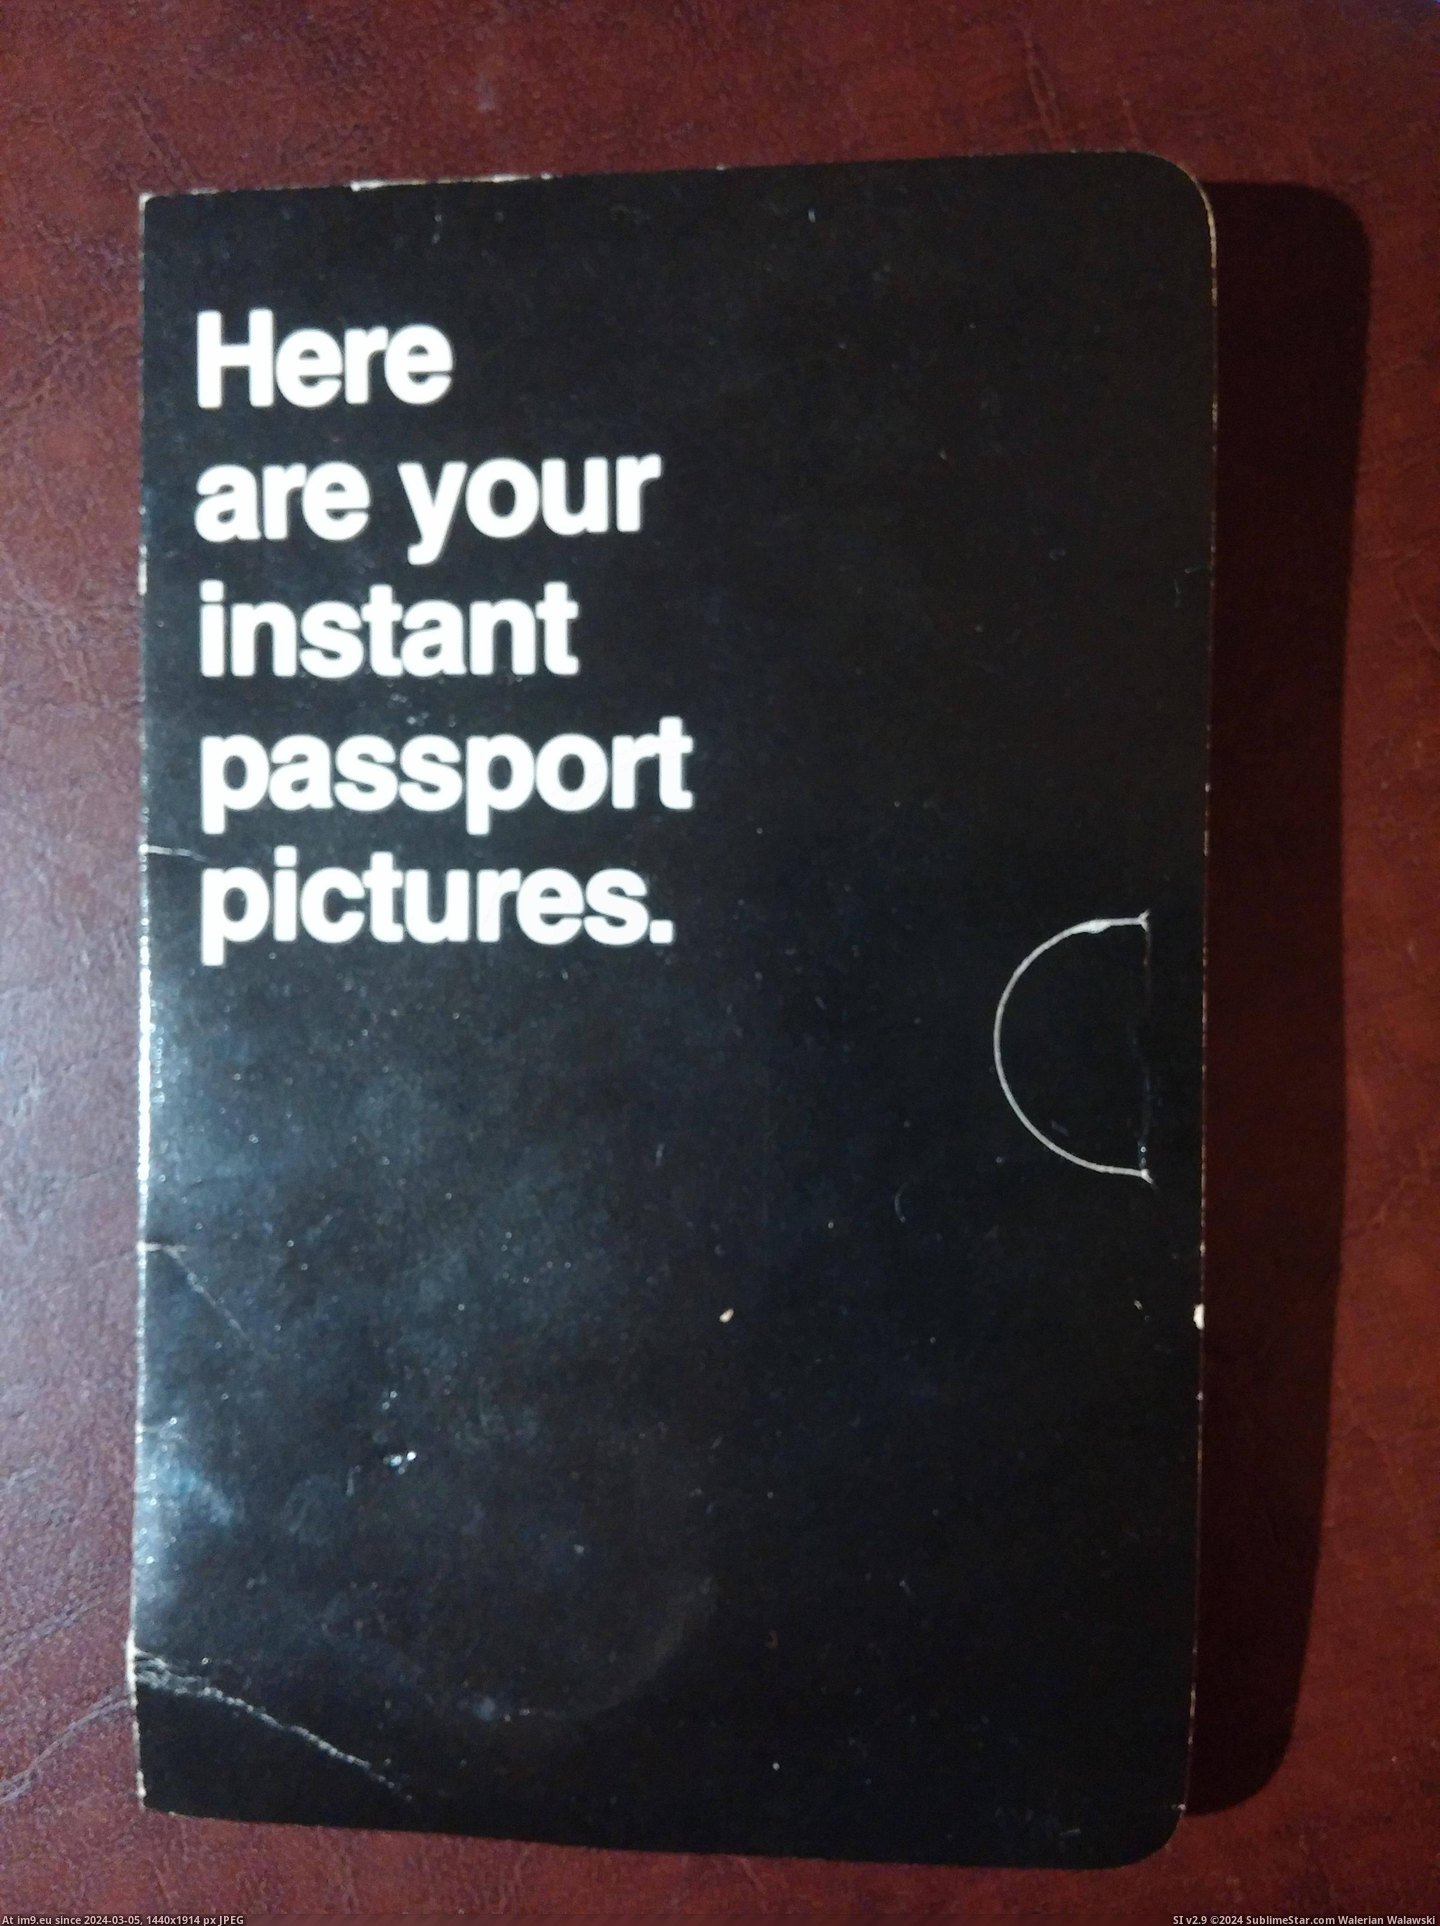 #Photo #Card #80s #Envelope #Passport #Humanity #Cards [Mildlyinteresting] This passport photo envelope from the '80s looks like a Cards Against Humanity card Pic. (Image of album My r/MILDLYINTERESTING favs))